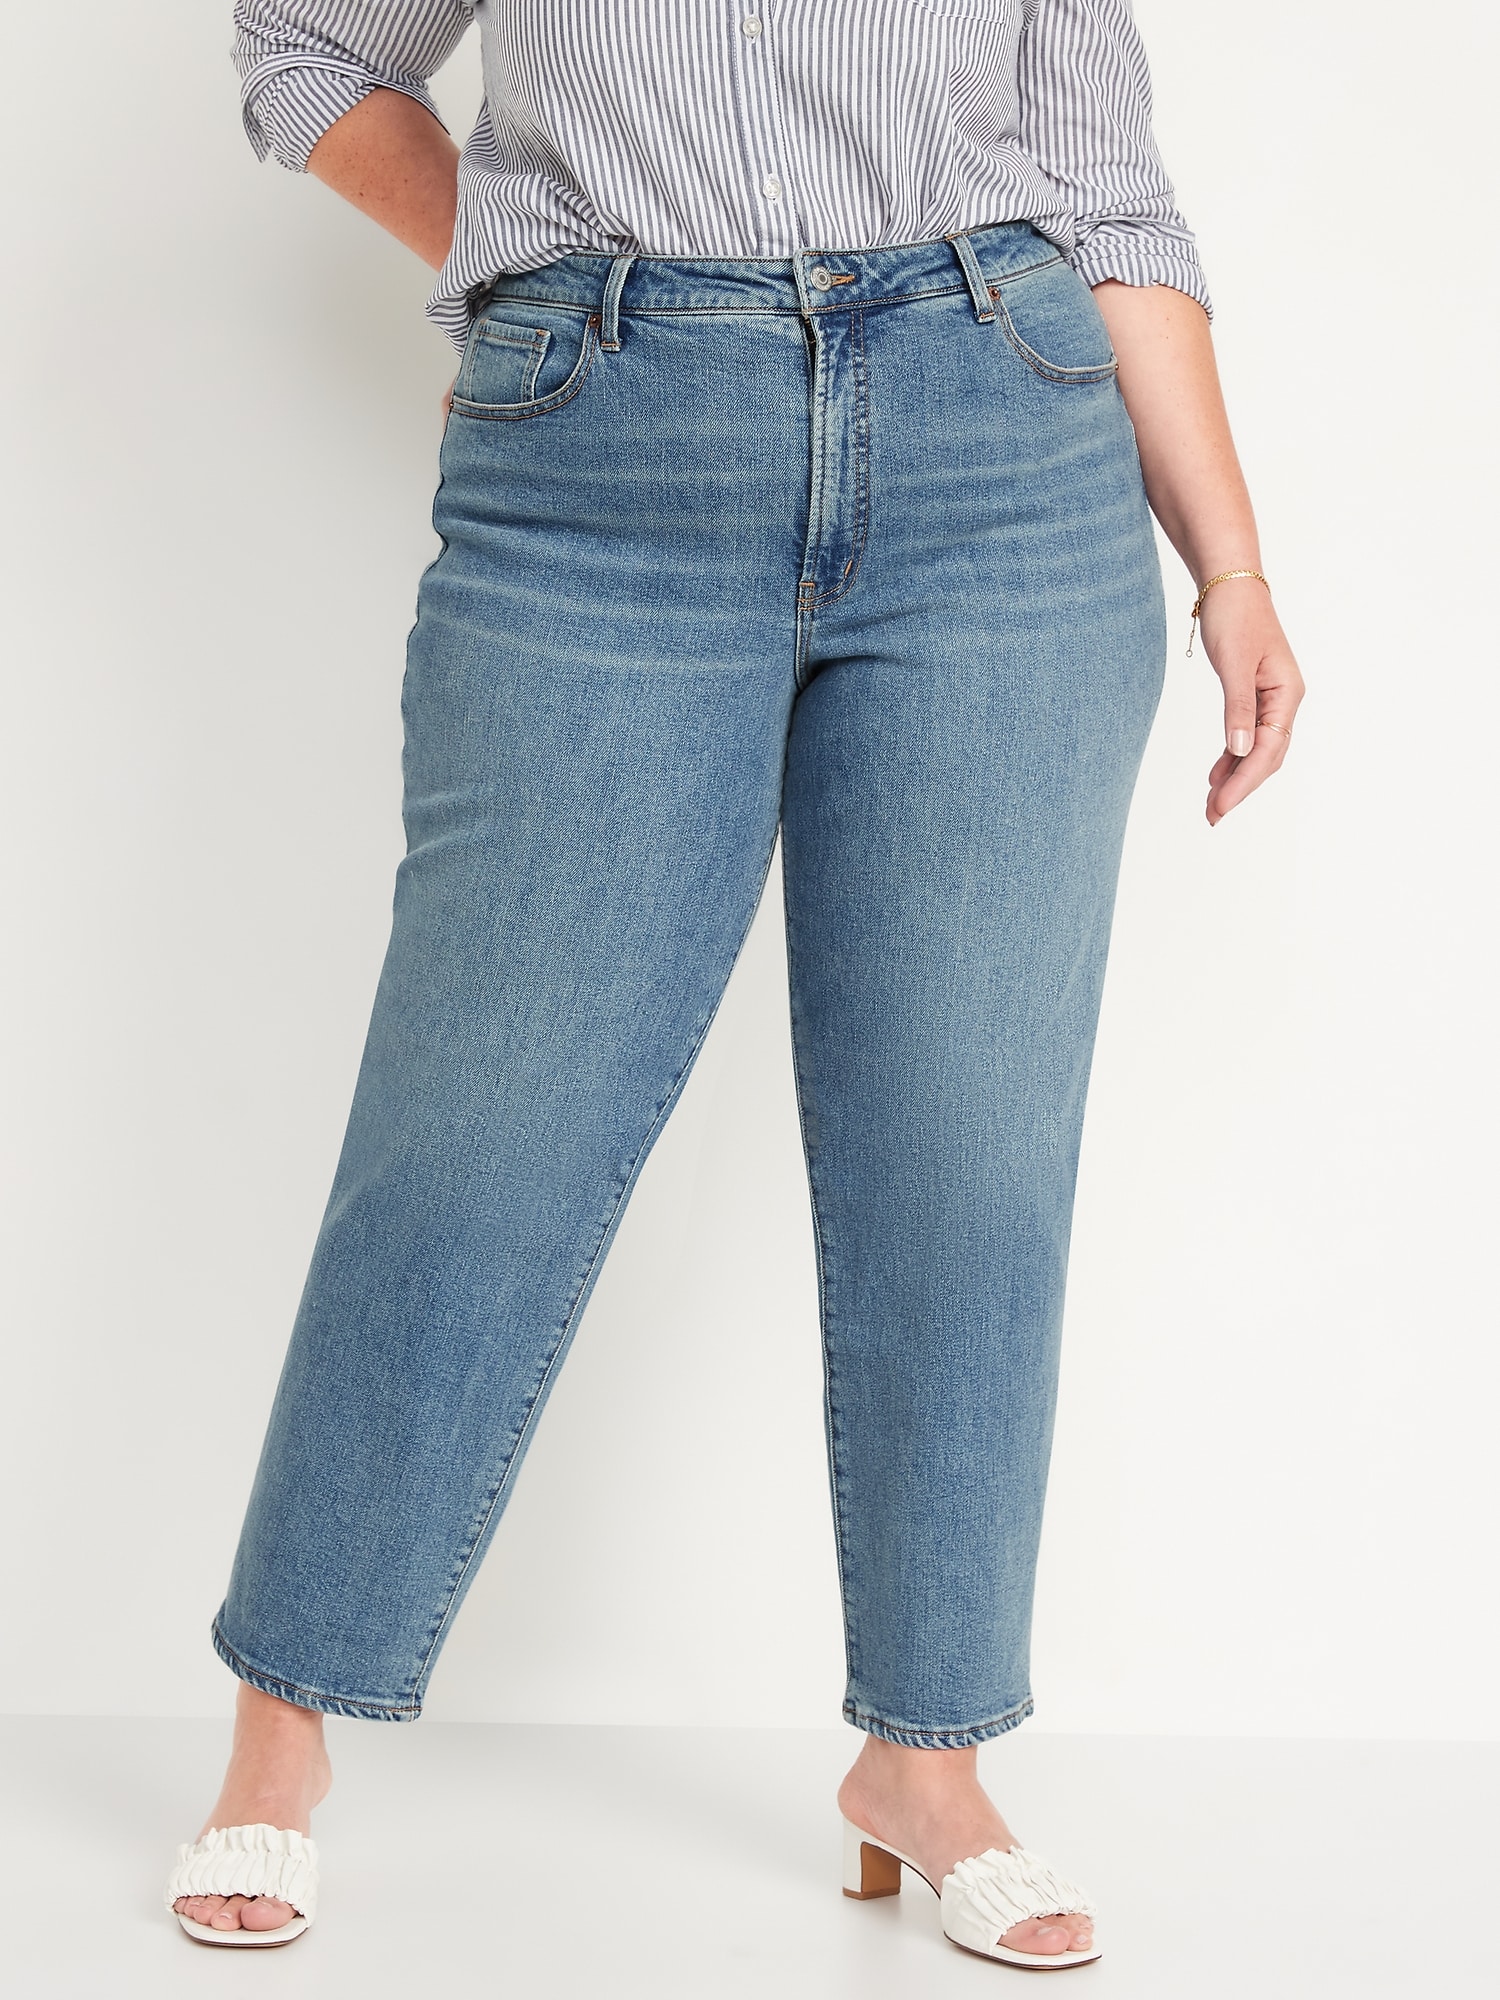 Old Navy Women's High-Waisted OG Loose Jeans - - Plus Size 18